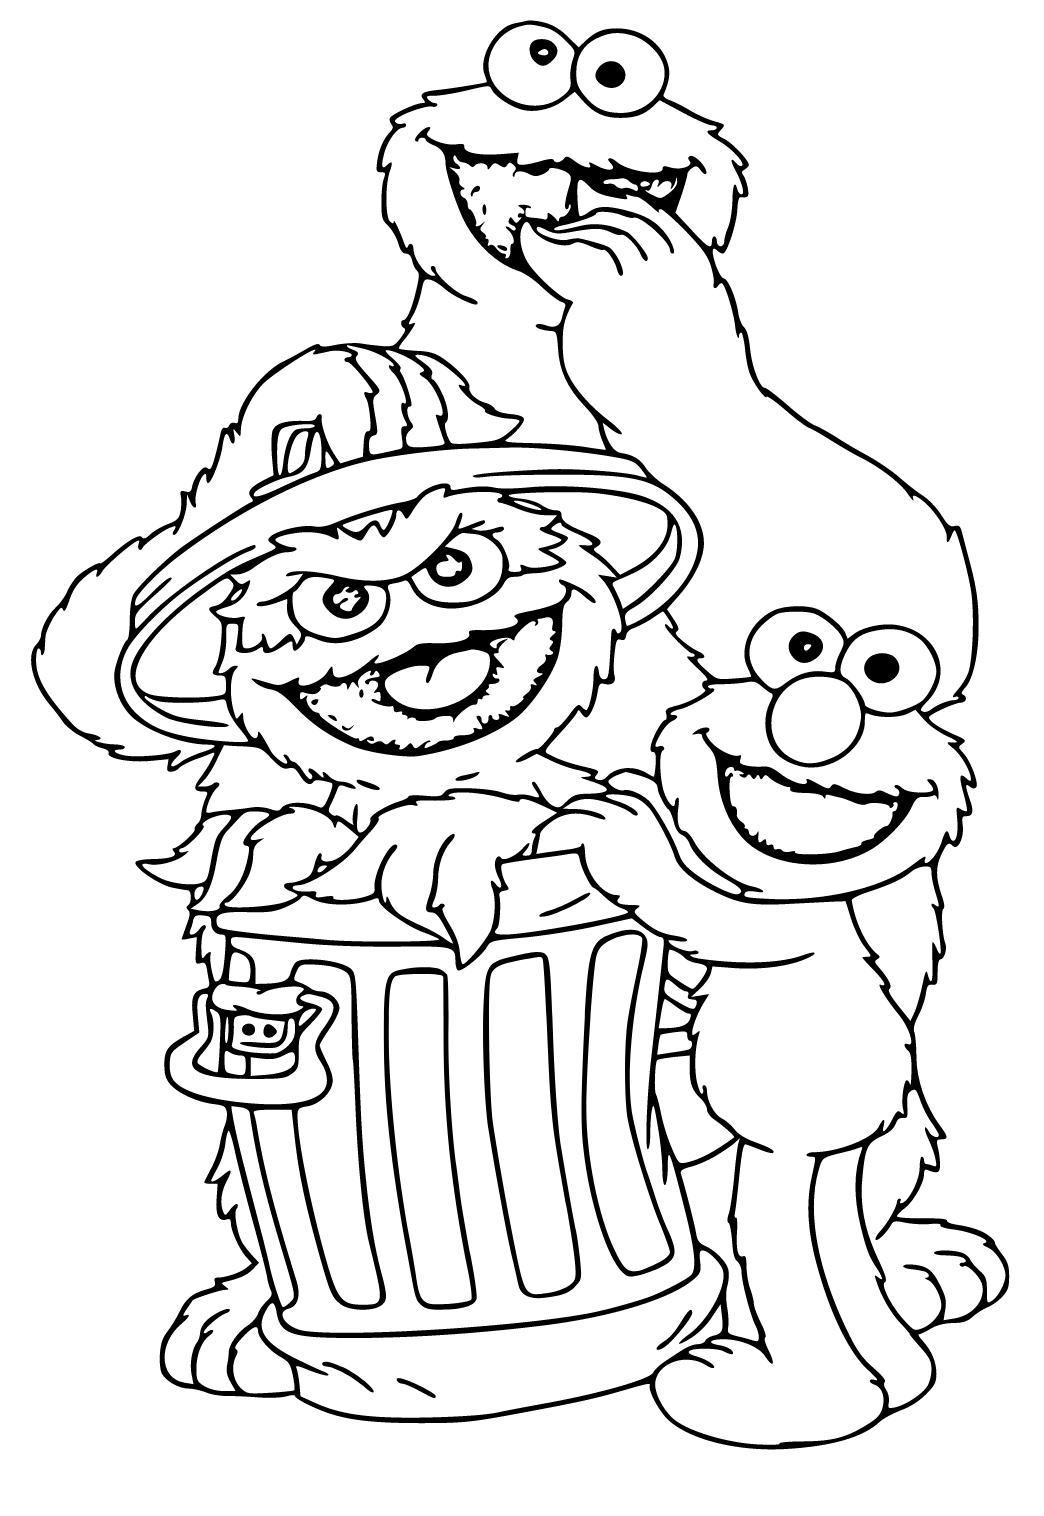 Free printable sesame street garbage can coloring page for adults and kids